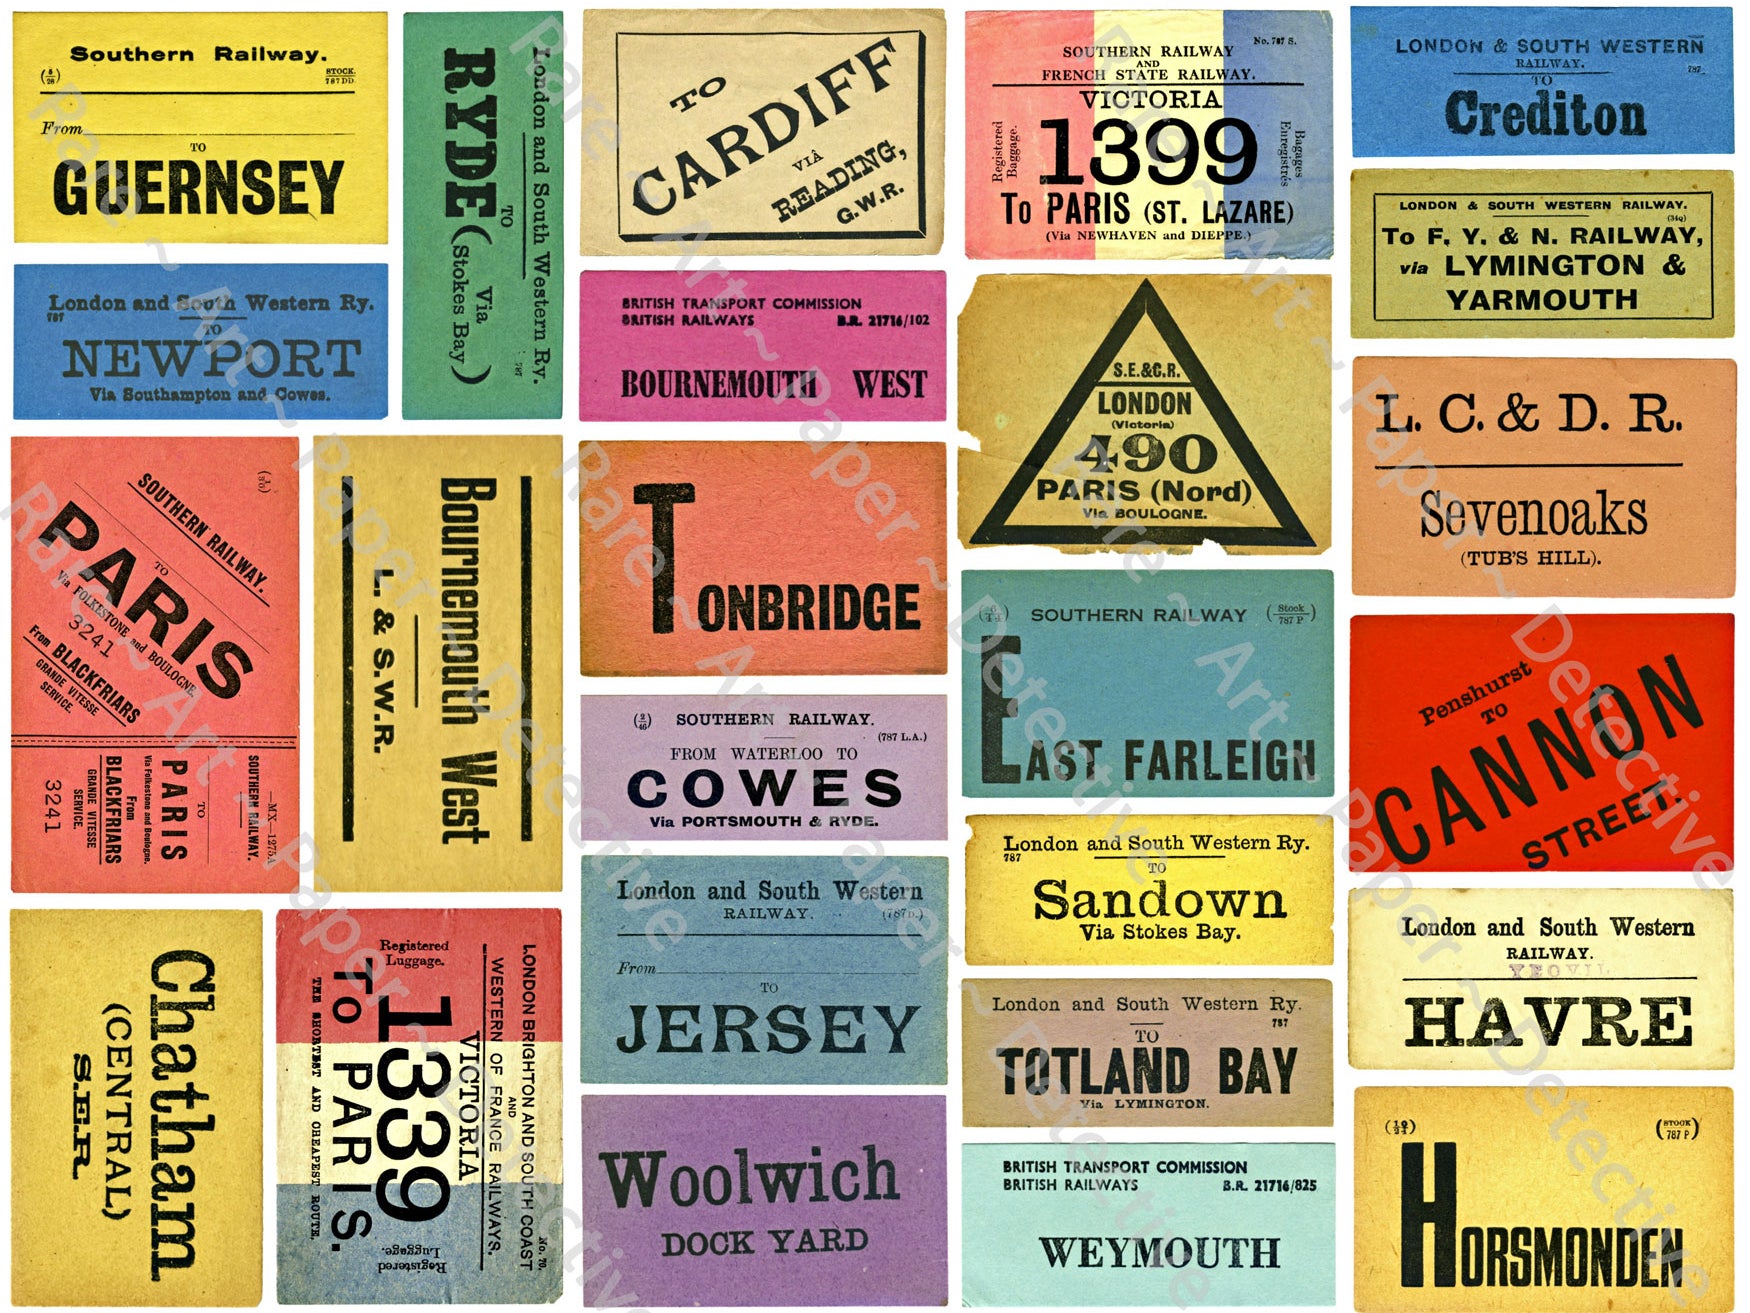 British Railway Luggage Label Stickers, Authentic Looking & Colorful Travel Labels, 8.5" x 11" Decal Sheet for Suitcases, #771